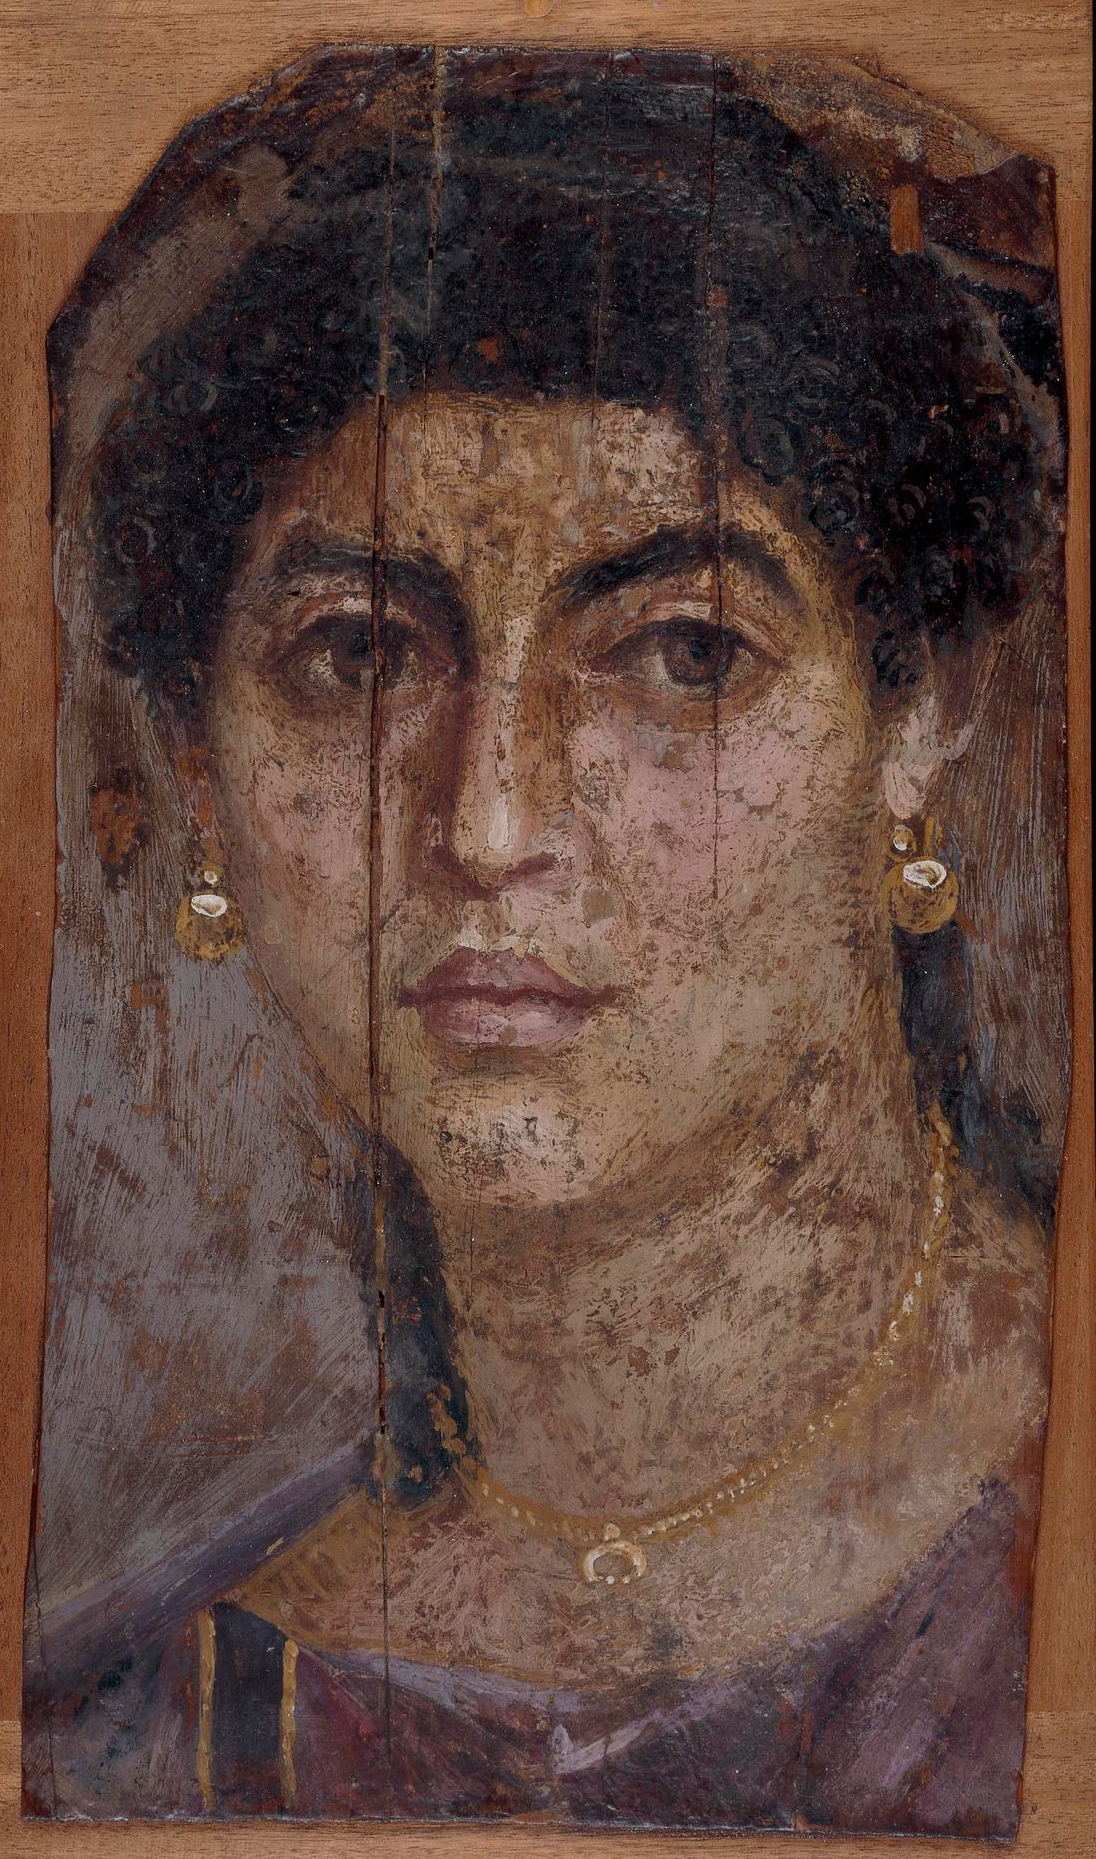 A mummy portrait from Roman-Egypt depicting a woman wearing a lunula pendant, 55-70 AD. Part of a collection of mummy portraits known as the Fayum Portraits. The British Museum.